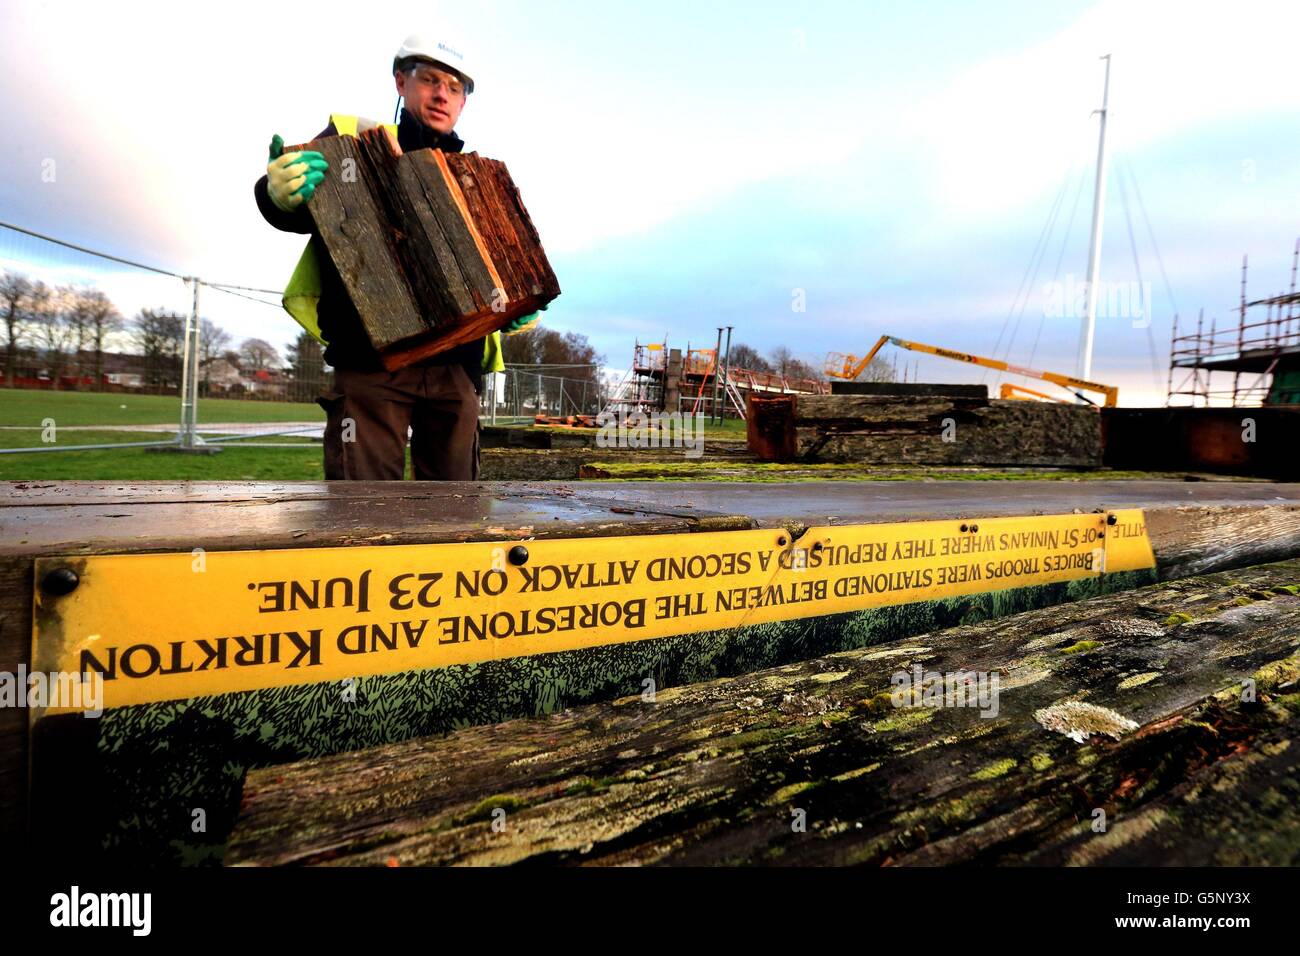 Mike Reid carries an old piece of timber ring beam which has been removed from the 1960s Rotunda Monument at the Battle of Bannockburn, the Heritage site in Bannockburn. A new poem commemorating the site of the Battle of Bannockburn by Scottish poet, essayist and travel writer Kathleen Jamie was announced today. The work will be inscribed on a new timber ring which will crown the Rotunda Monument. Stock Photo